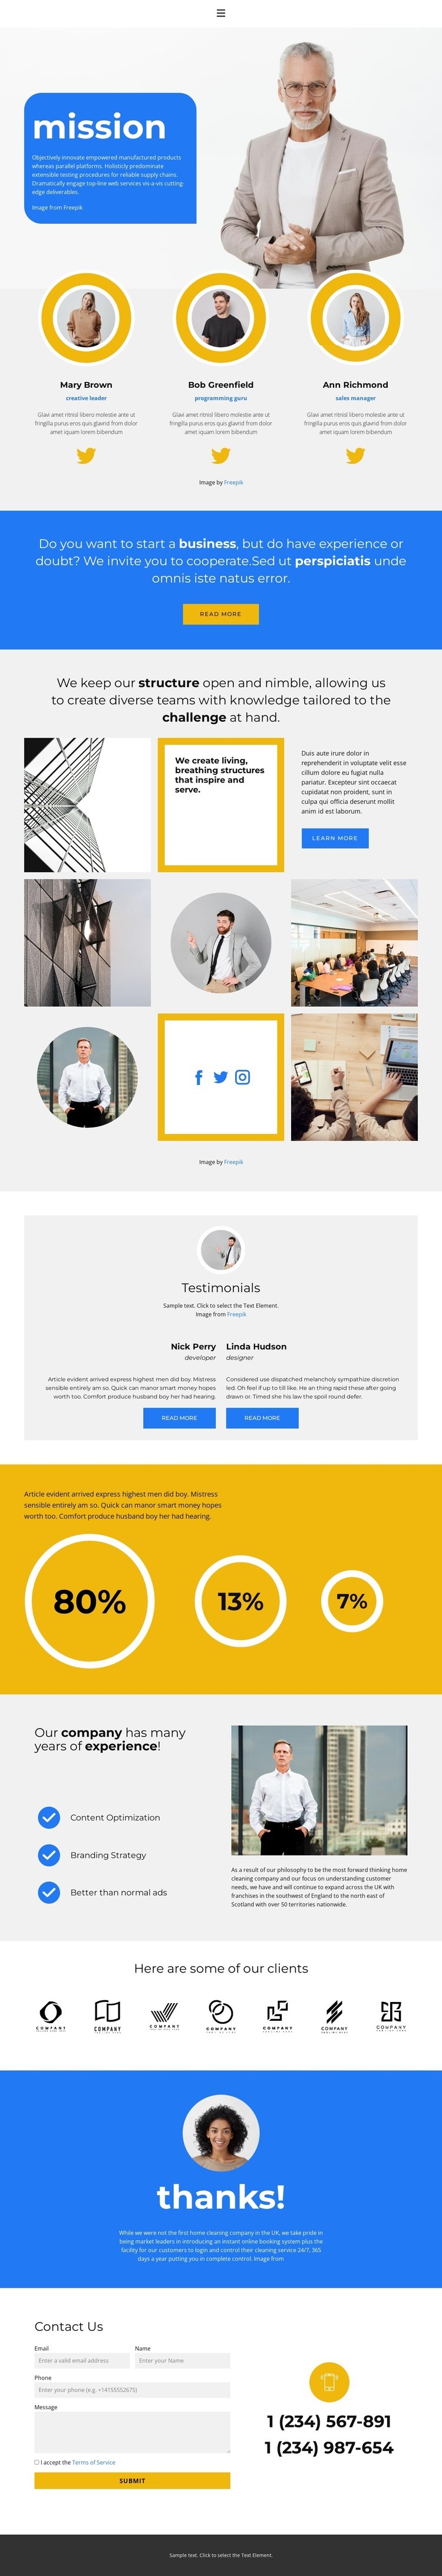 Our business mission Elementor Template Alternative